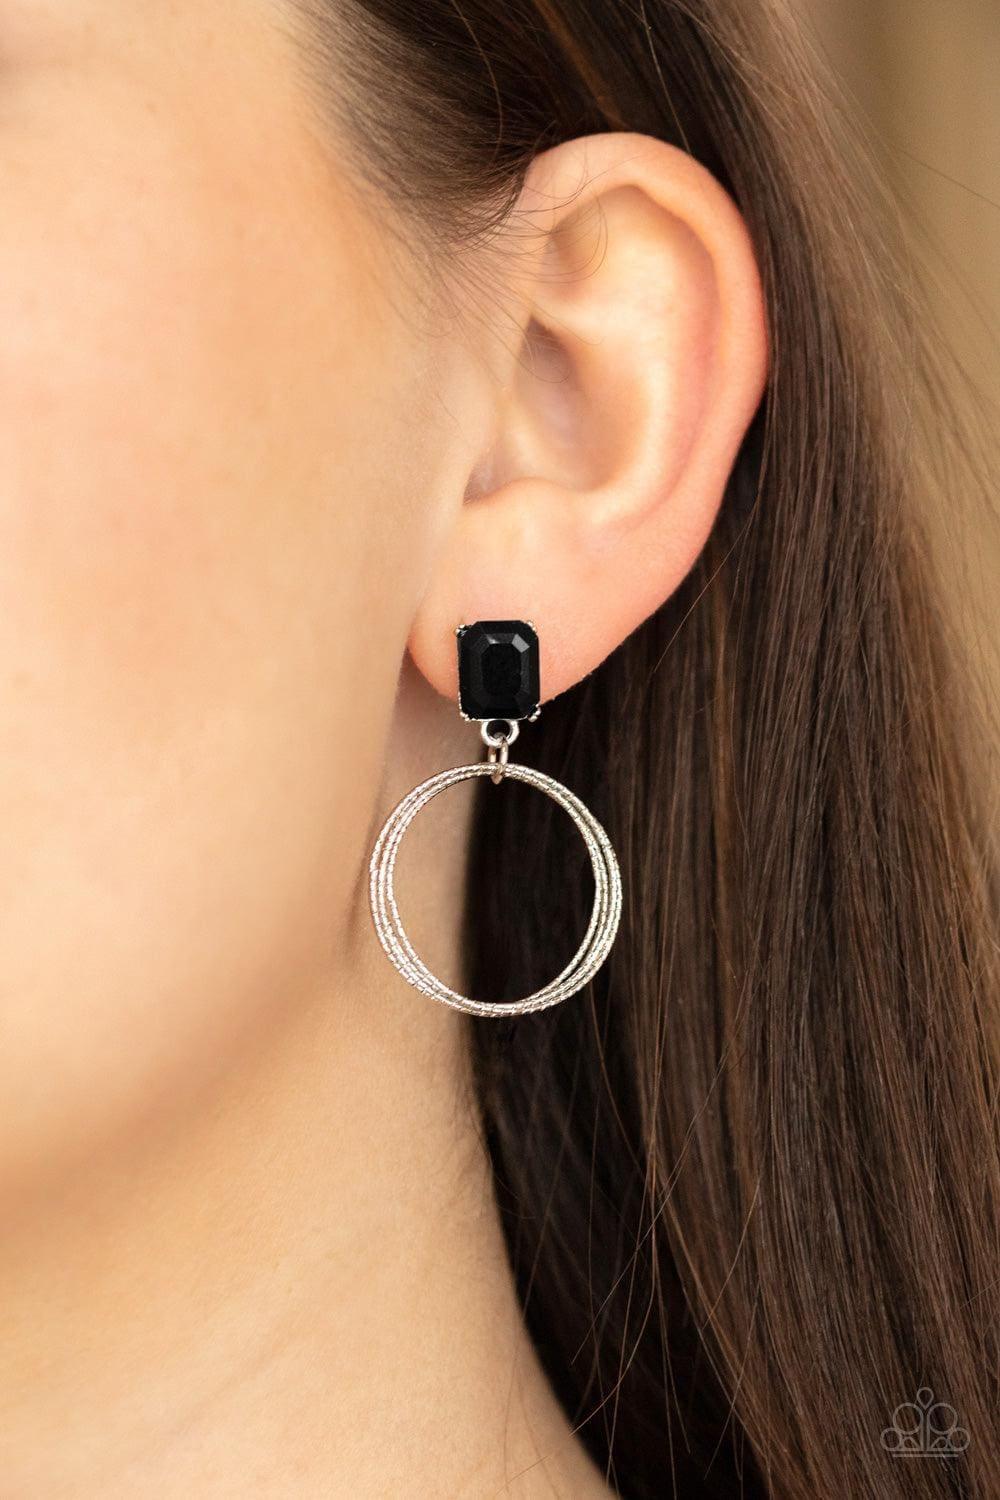 Paparazzi Accessories - Prismatic Perfection - Black Earrings - Bling by JessieK